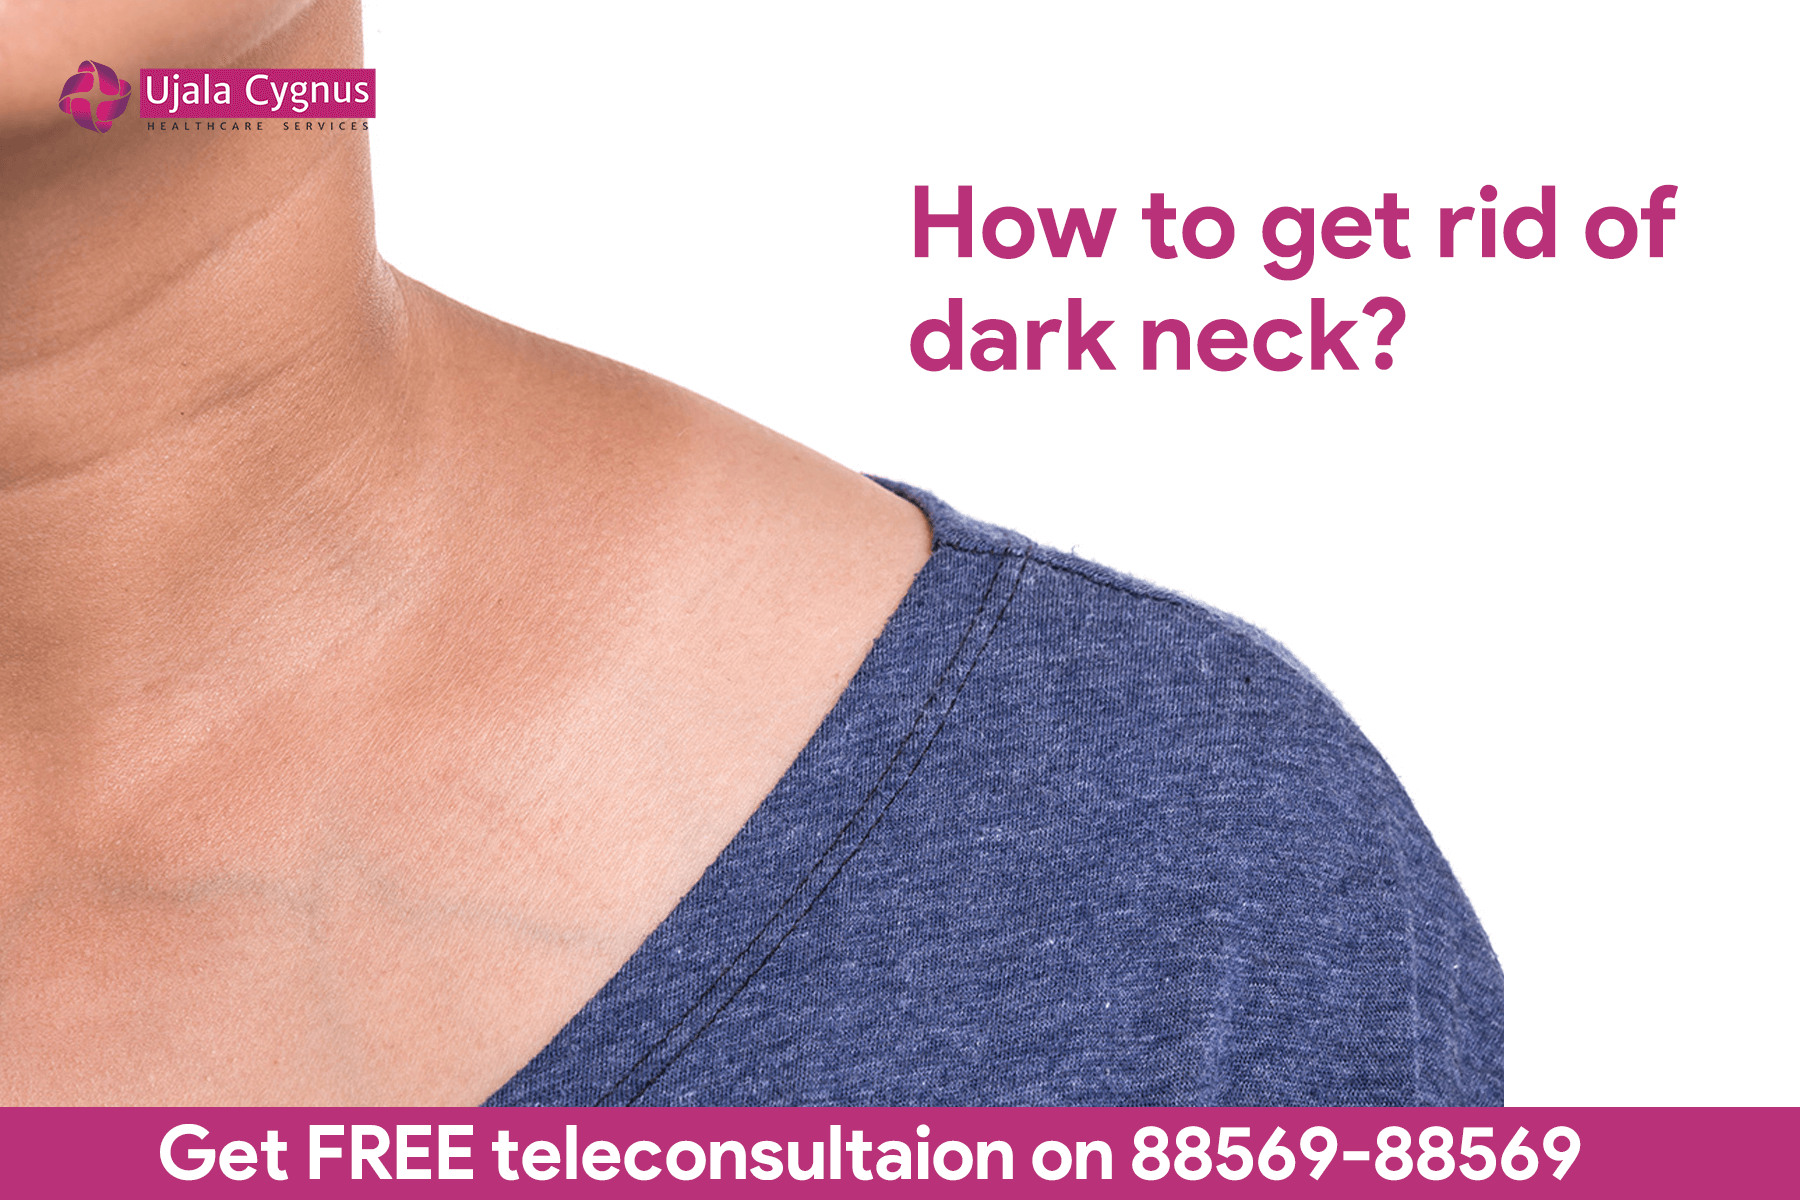 how to get rid of dark neck?